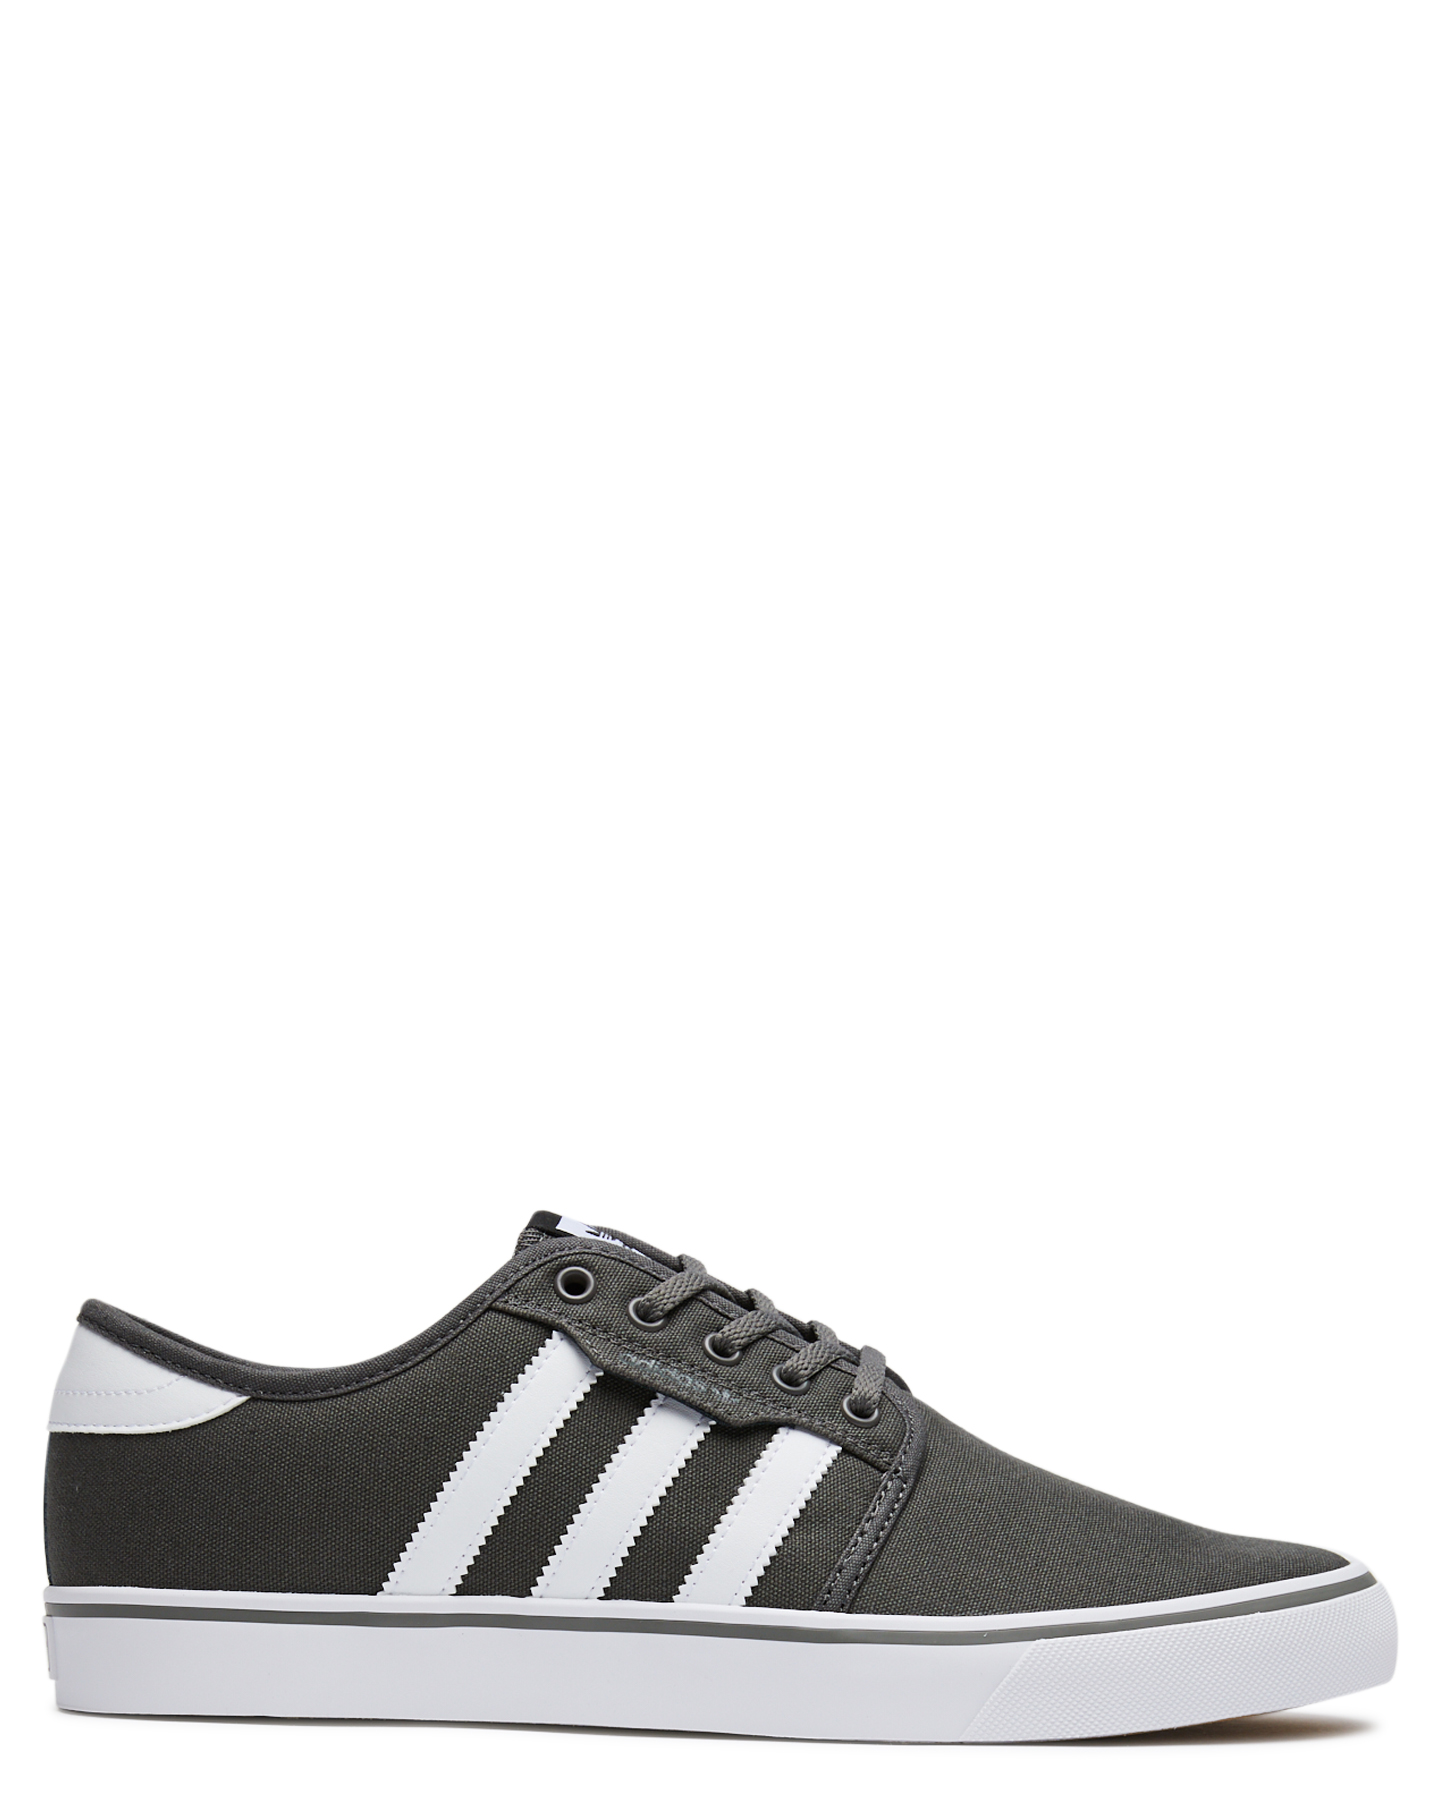 adidas men's seeley shoes